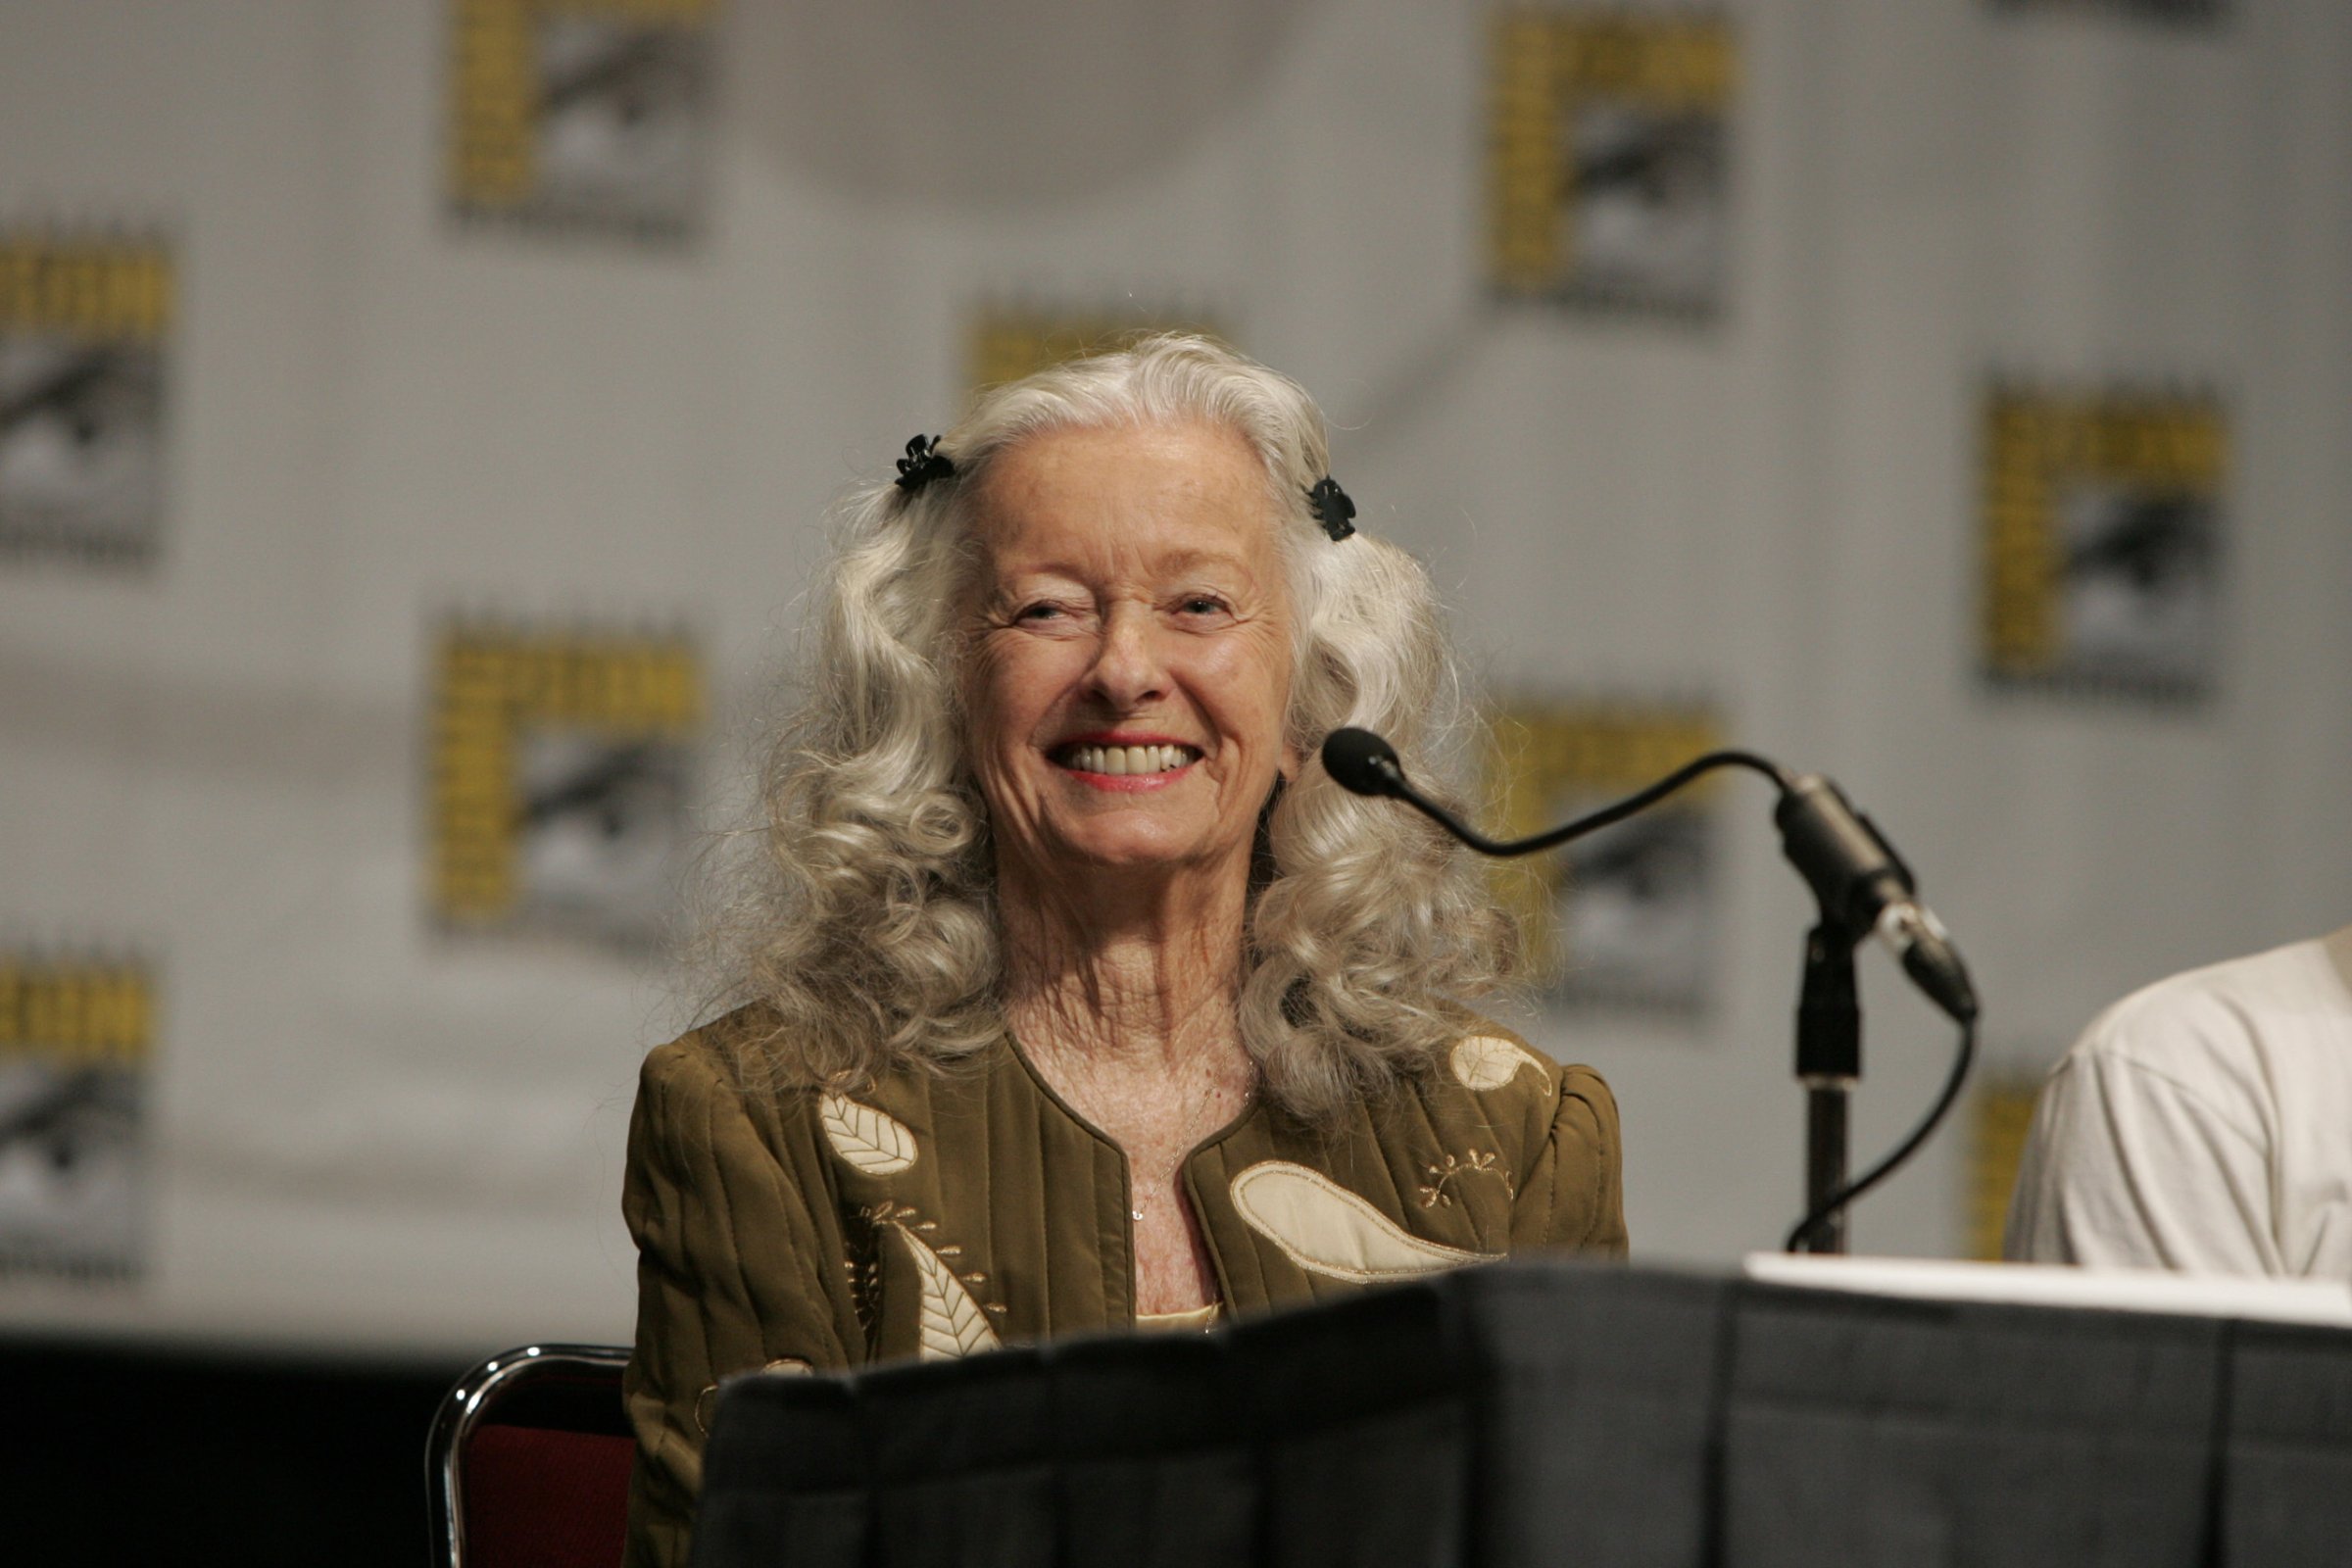 Noel Neill during Warner Home Video introduces 'Superman II: The Richard Donner Cut' and the New 'Superman' DVD collections featuring Christopher Reeve's Man of Steel at Comic Con in San Diego, Calif.